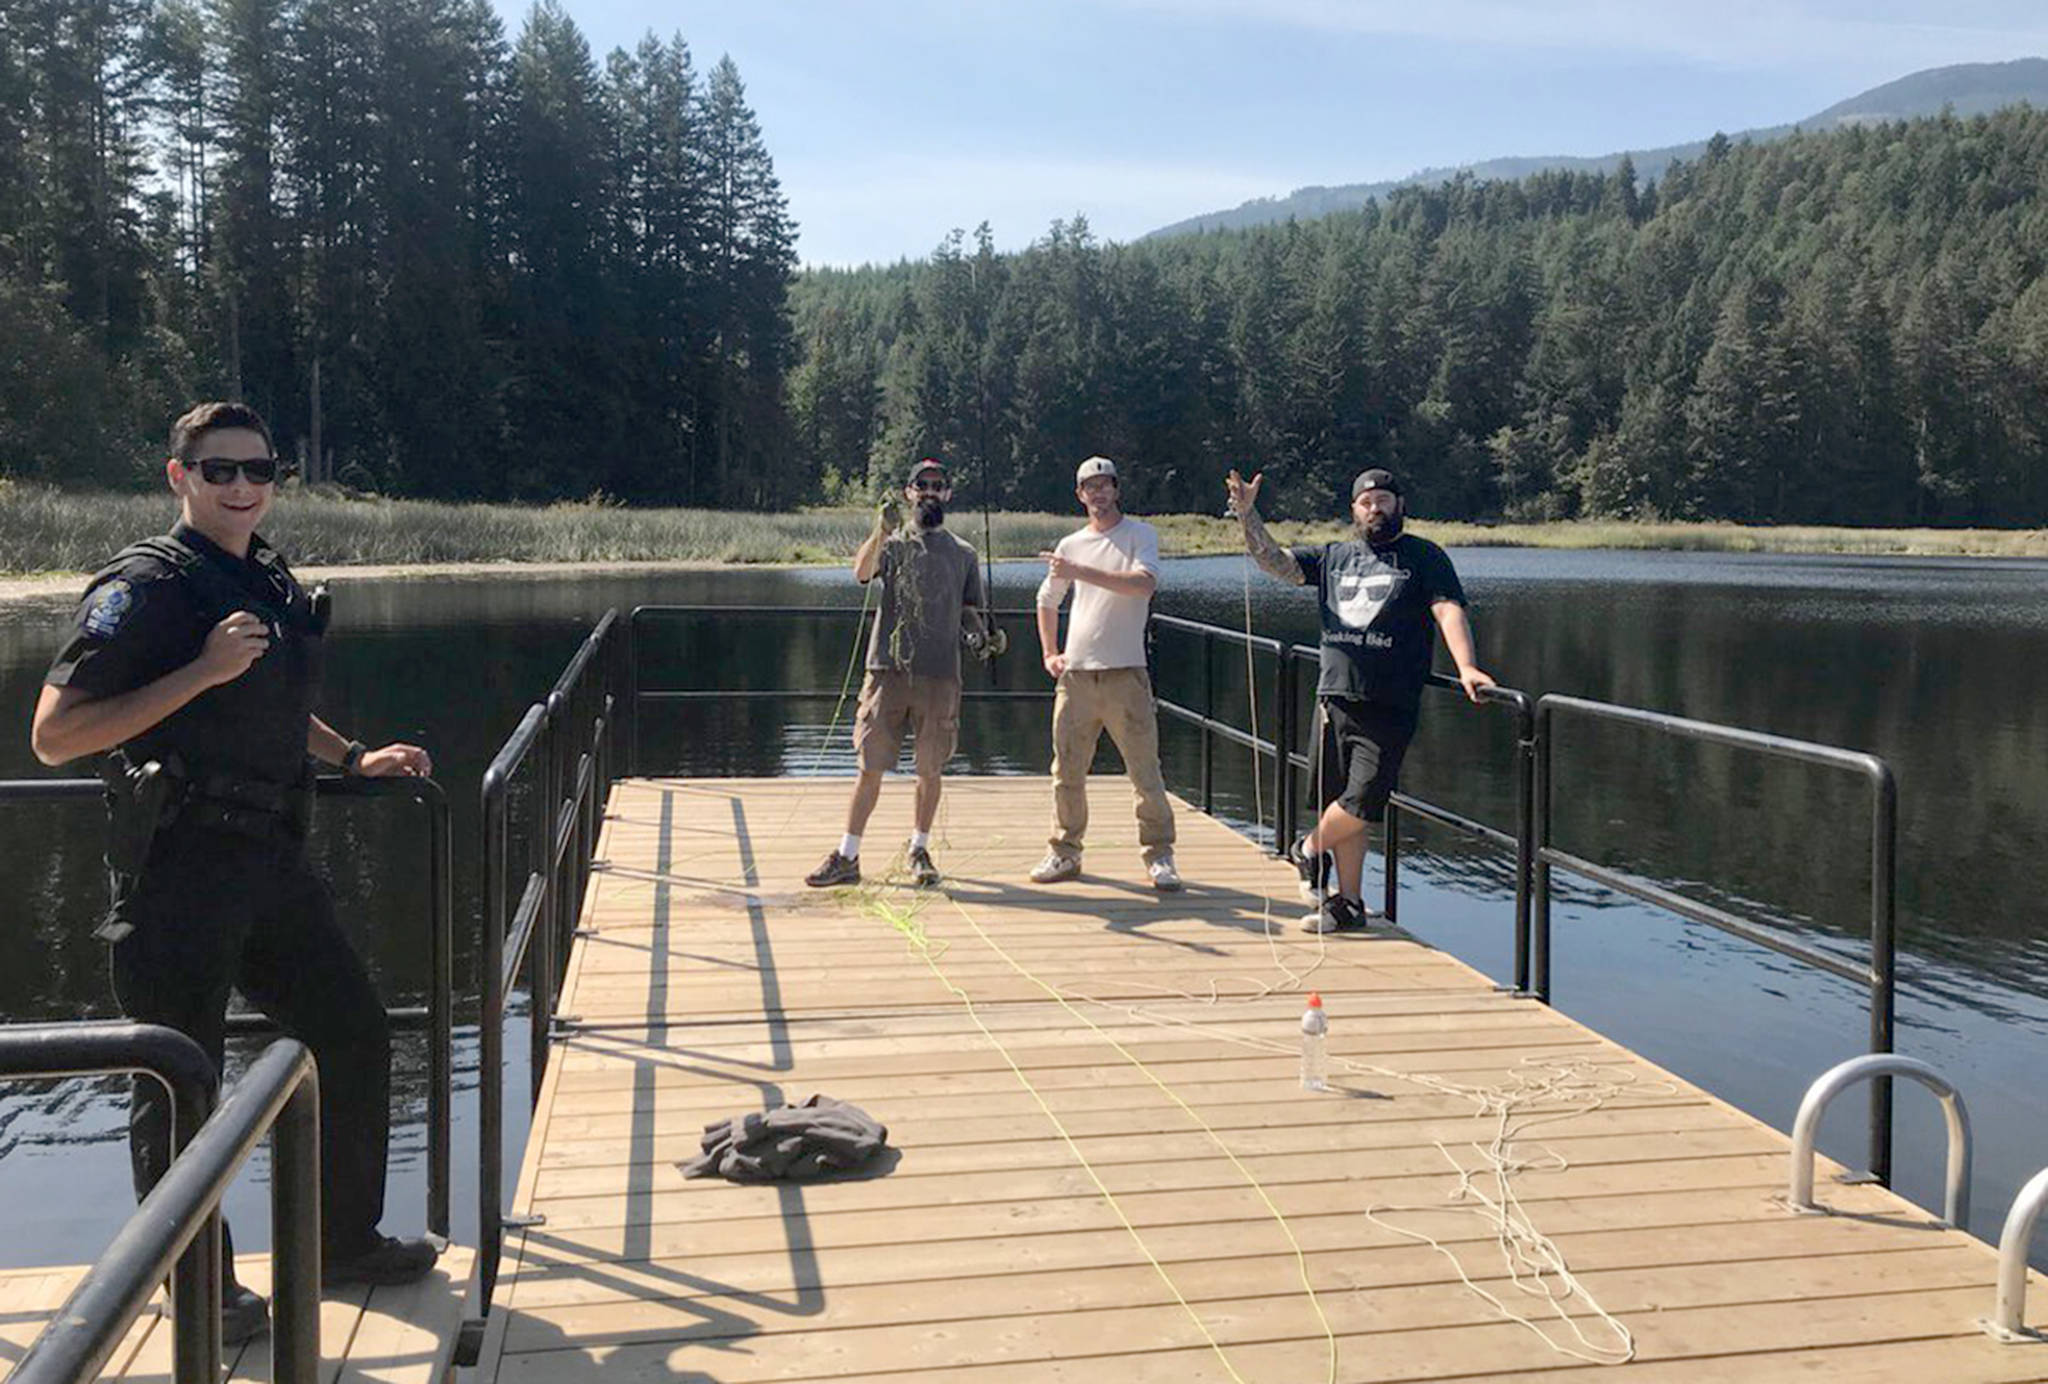 Chair, knives and bottle caps: 3 anglers clean up B.C. lake by